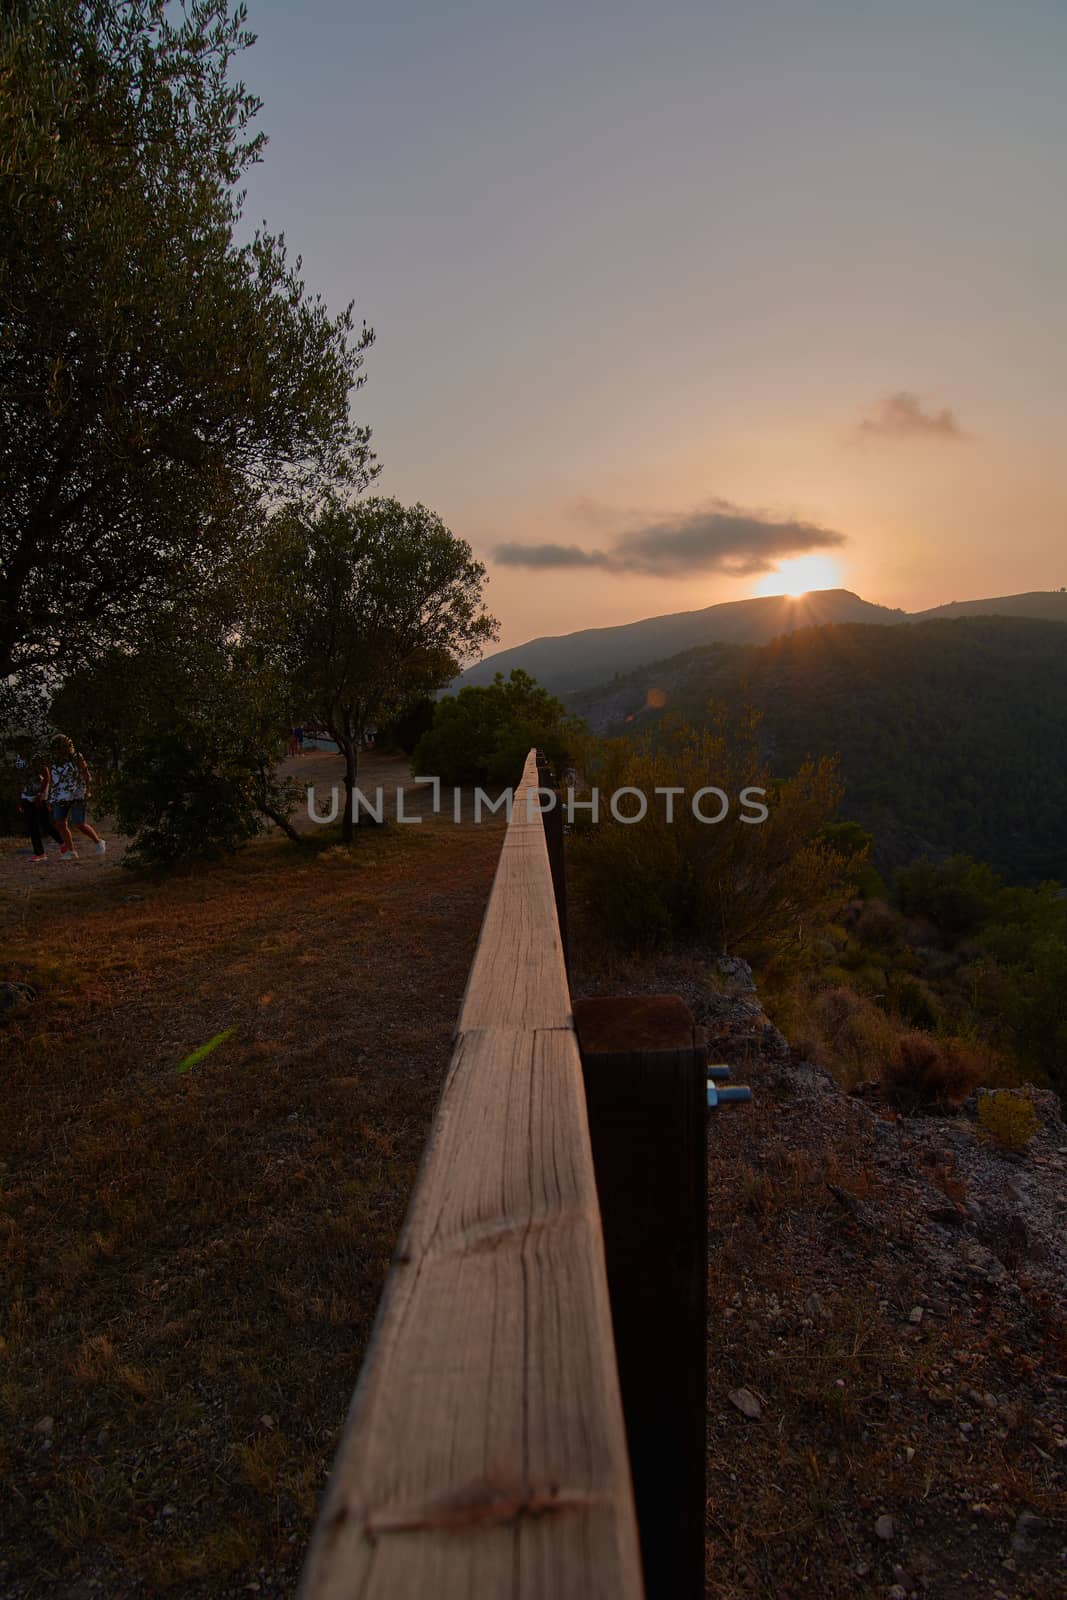 Wooden path to the sun in the mountain by raul_ruiz